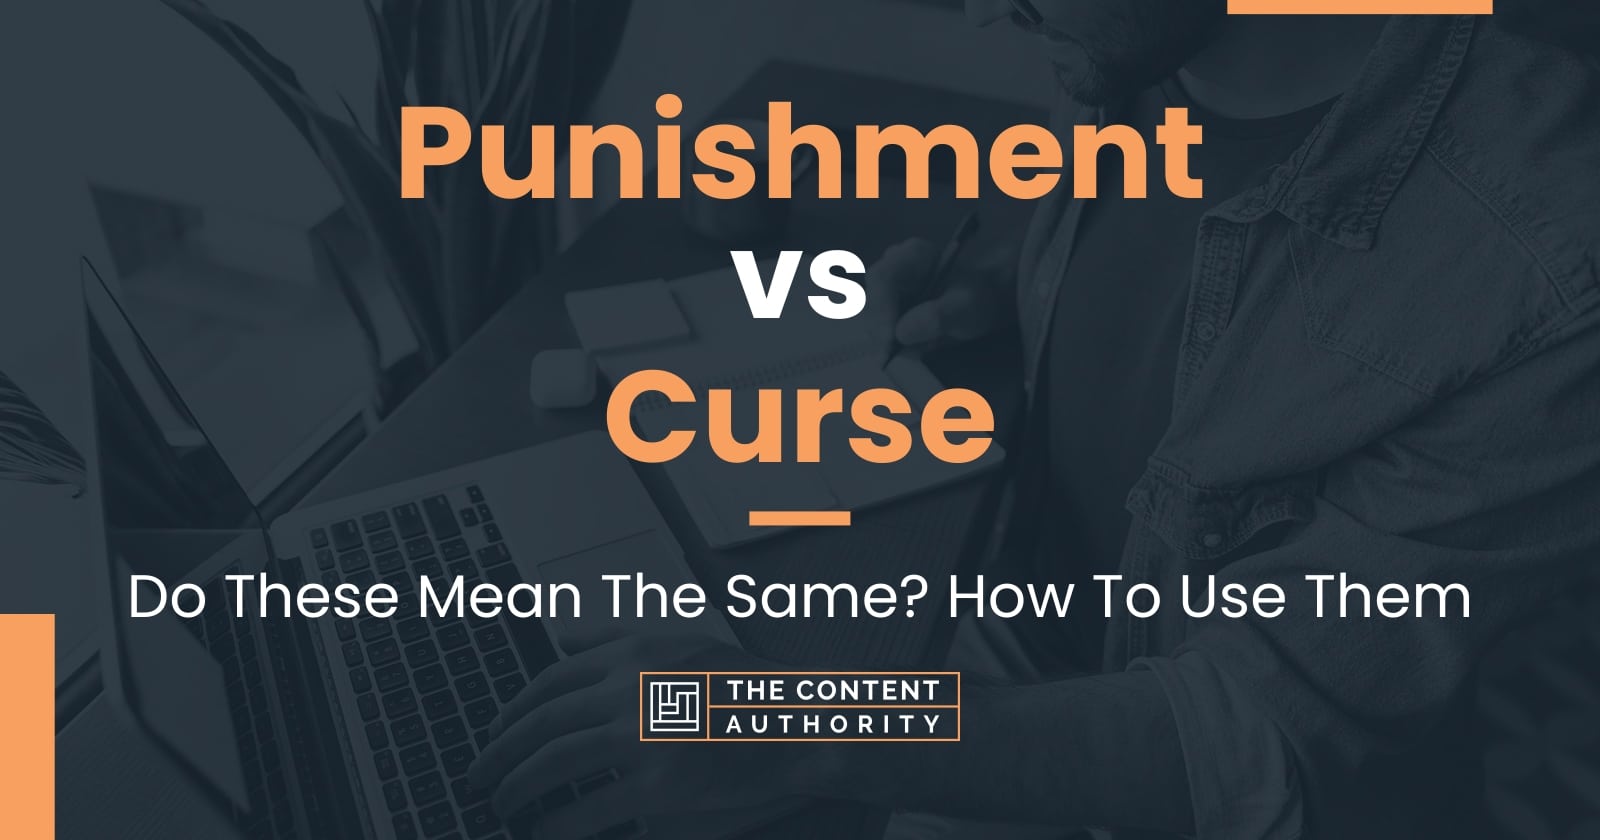 Punishment vs Curse: Do These Mean The Same? How To Use Them